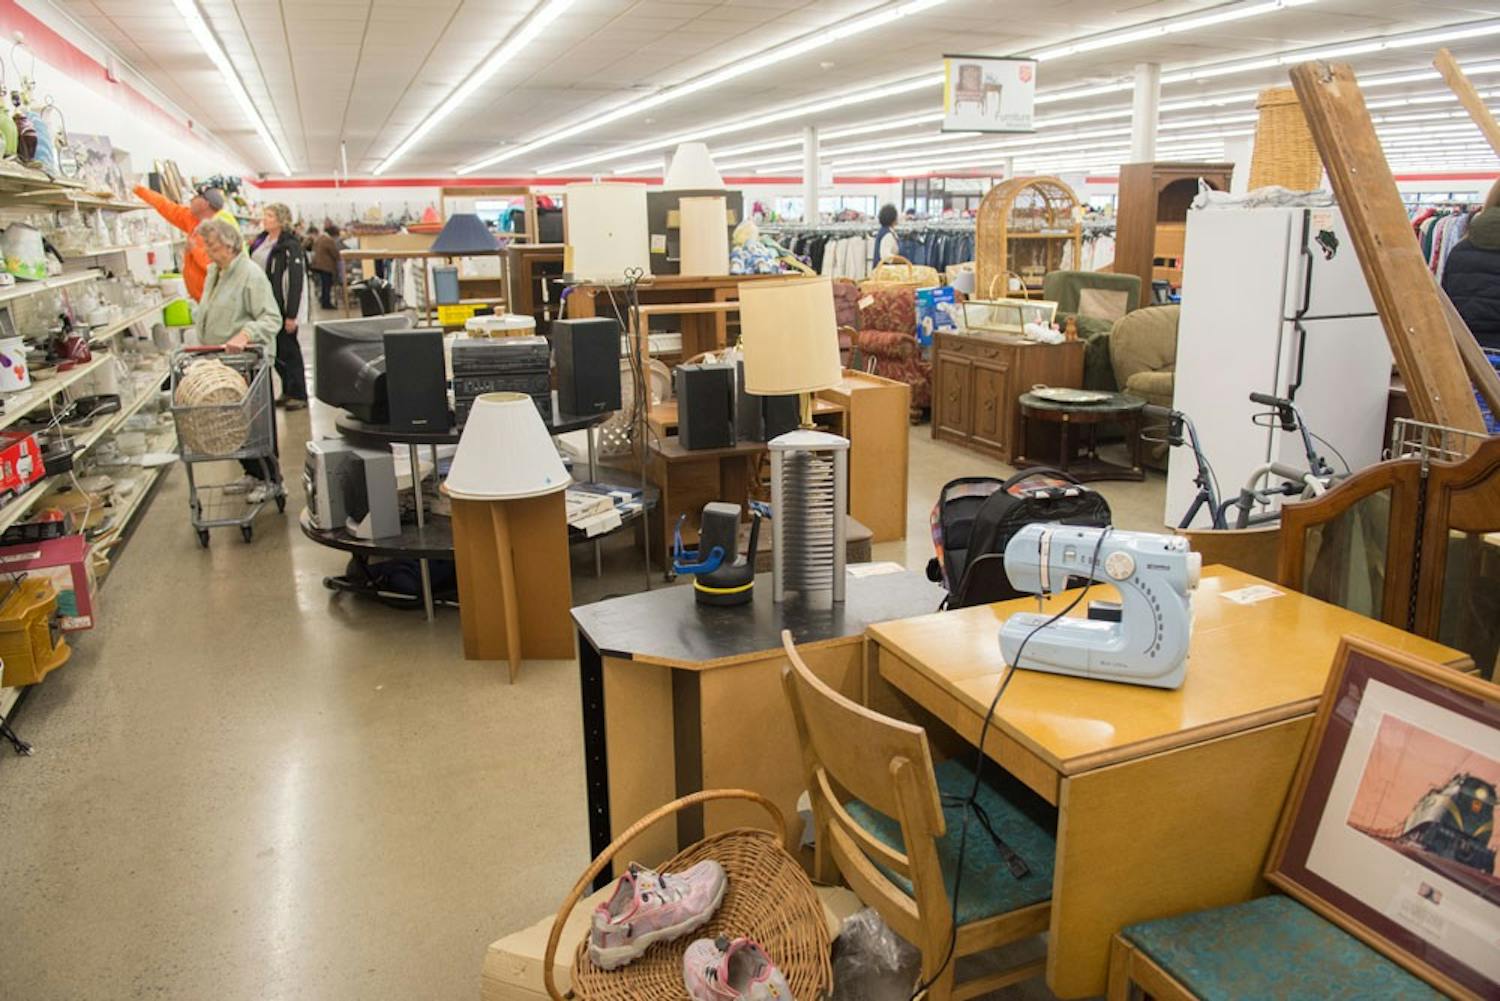 The Salvation Army, located a few miles off North Campus, is one option for students looking for cheap furniture.&nbsp;